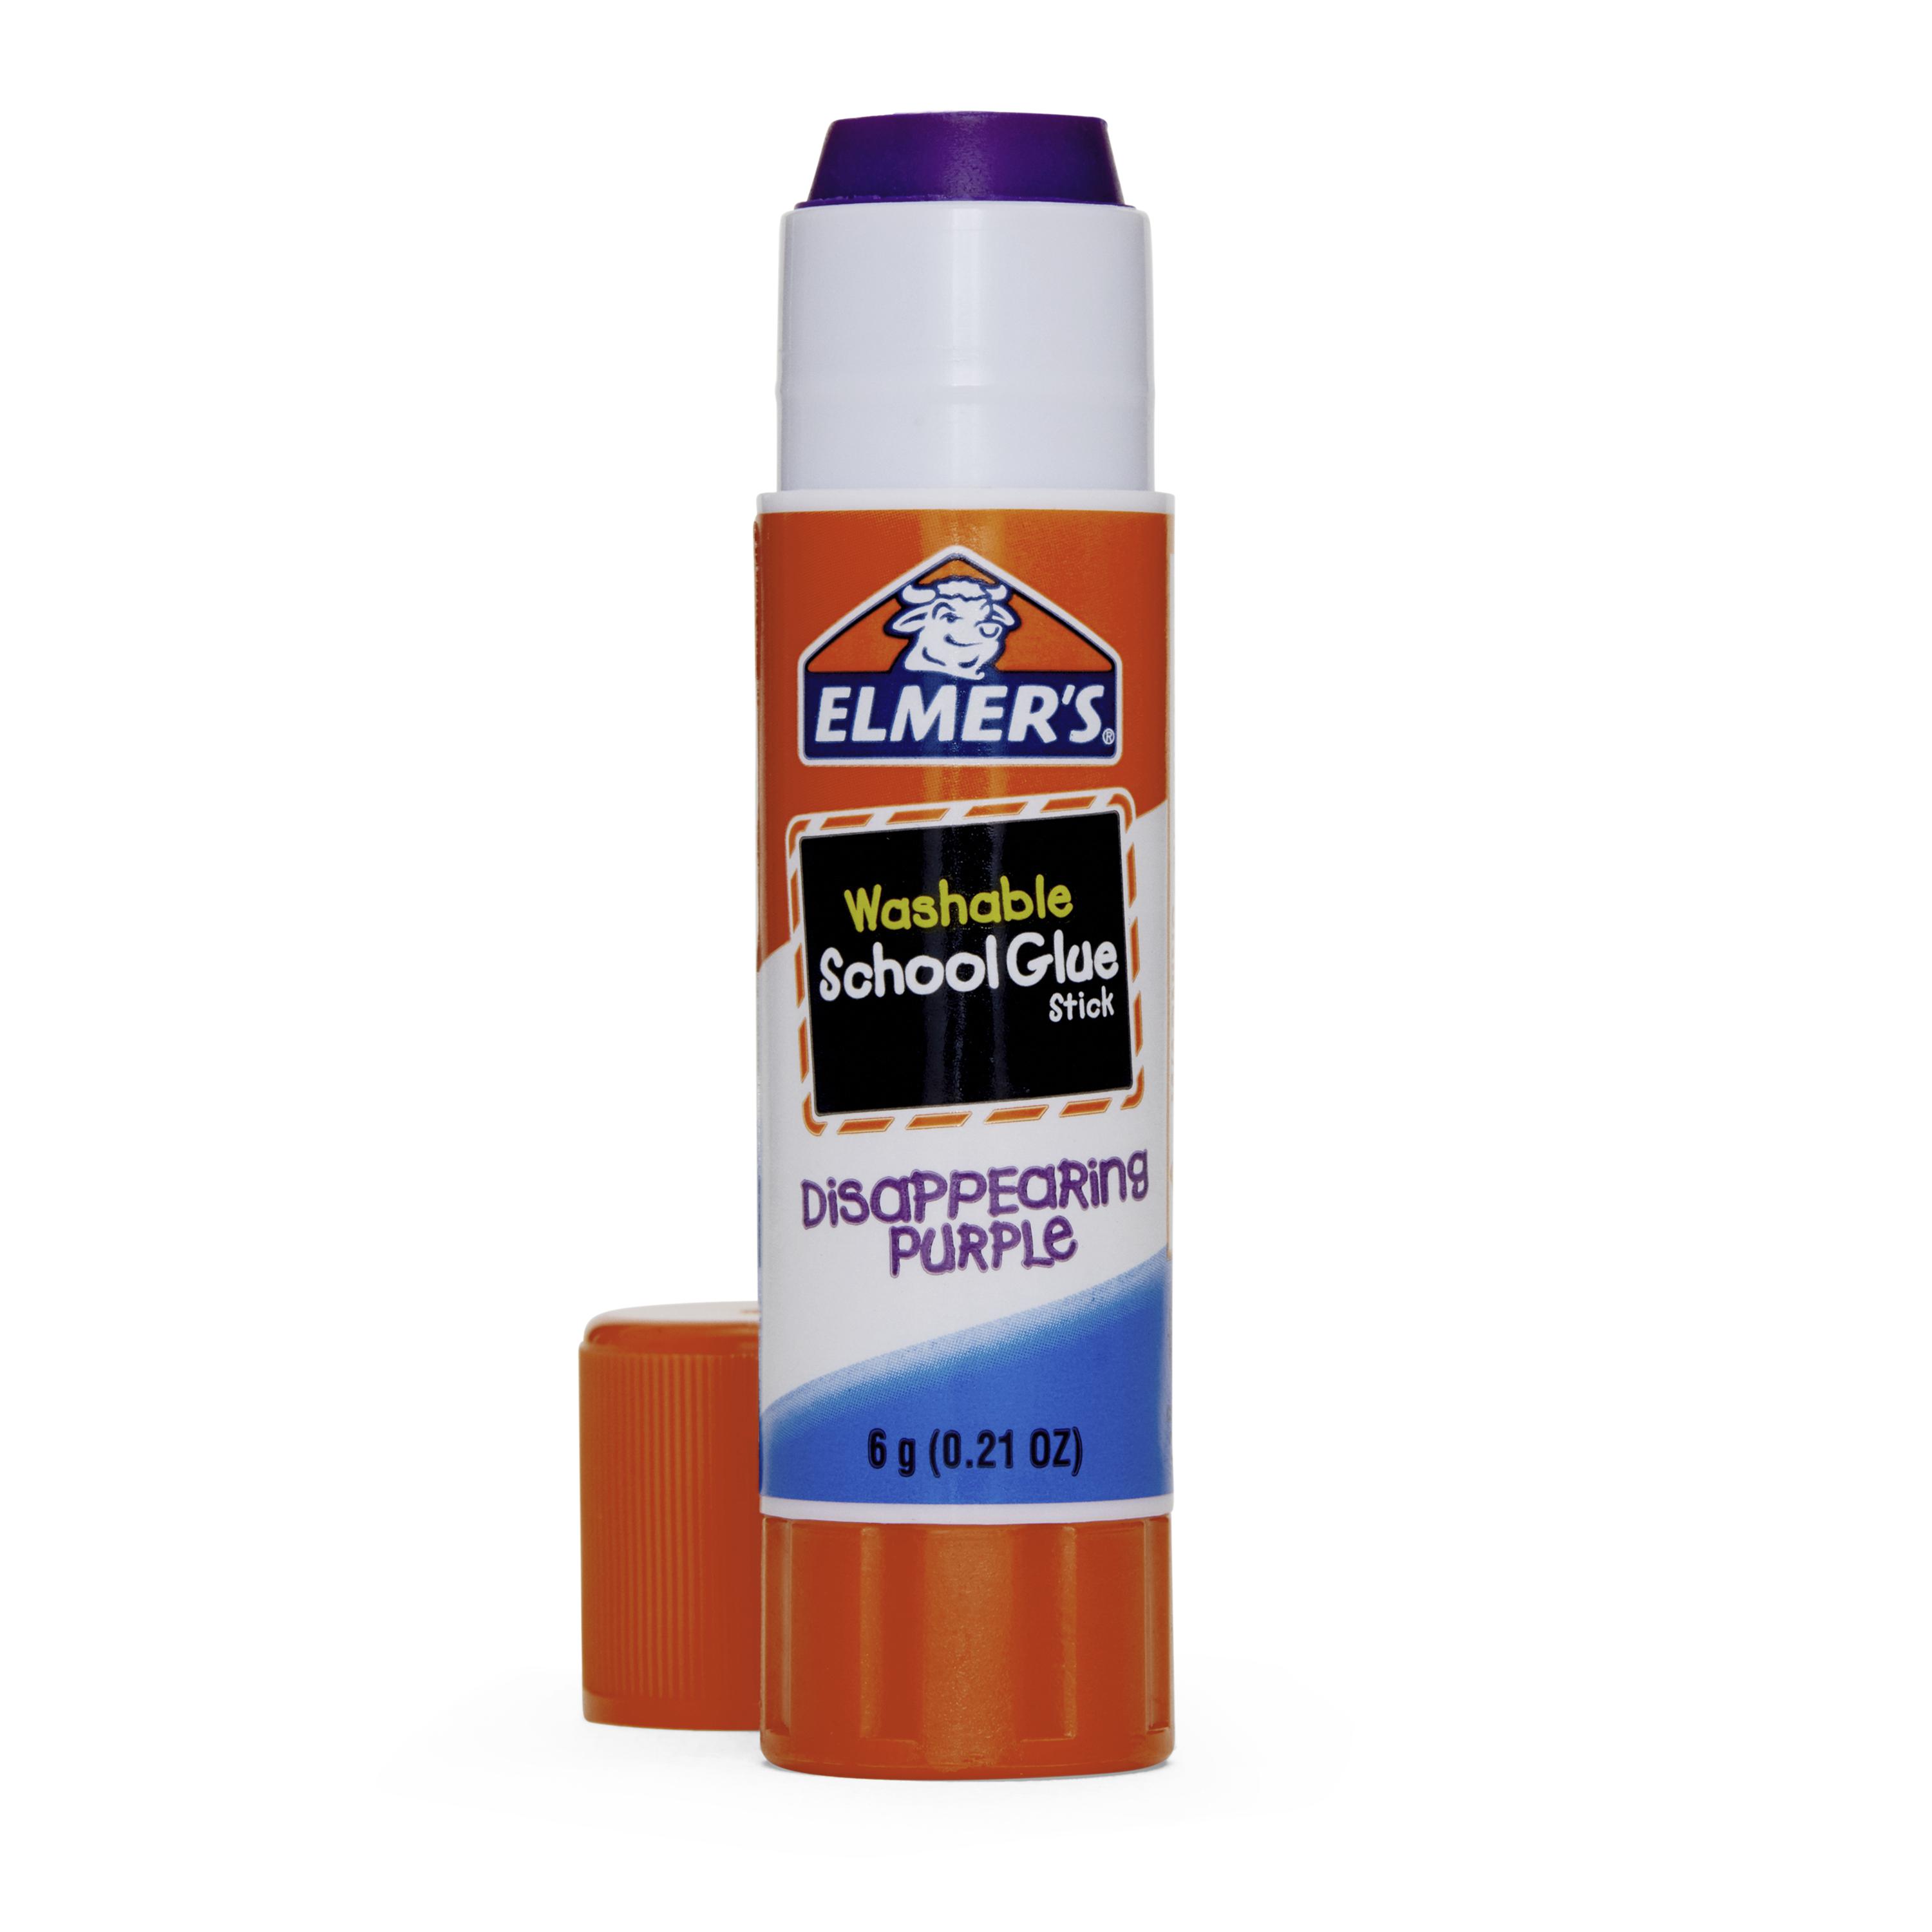 Elmer's Washable School Glue Sticks, Gel and Disappearing Purple, 0.21 Ounce, 6 Count - image 5 of 7